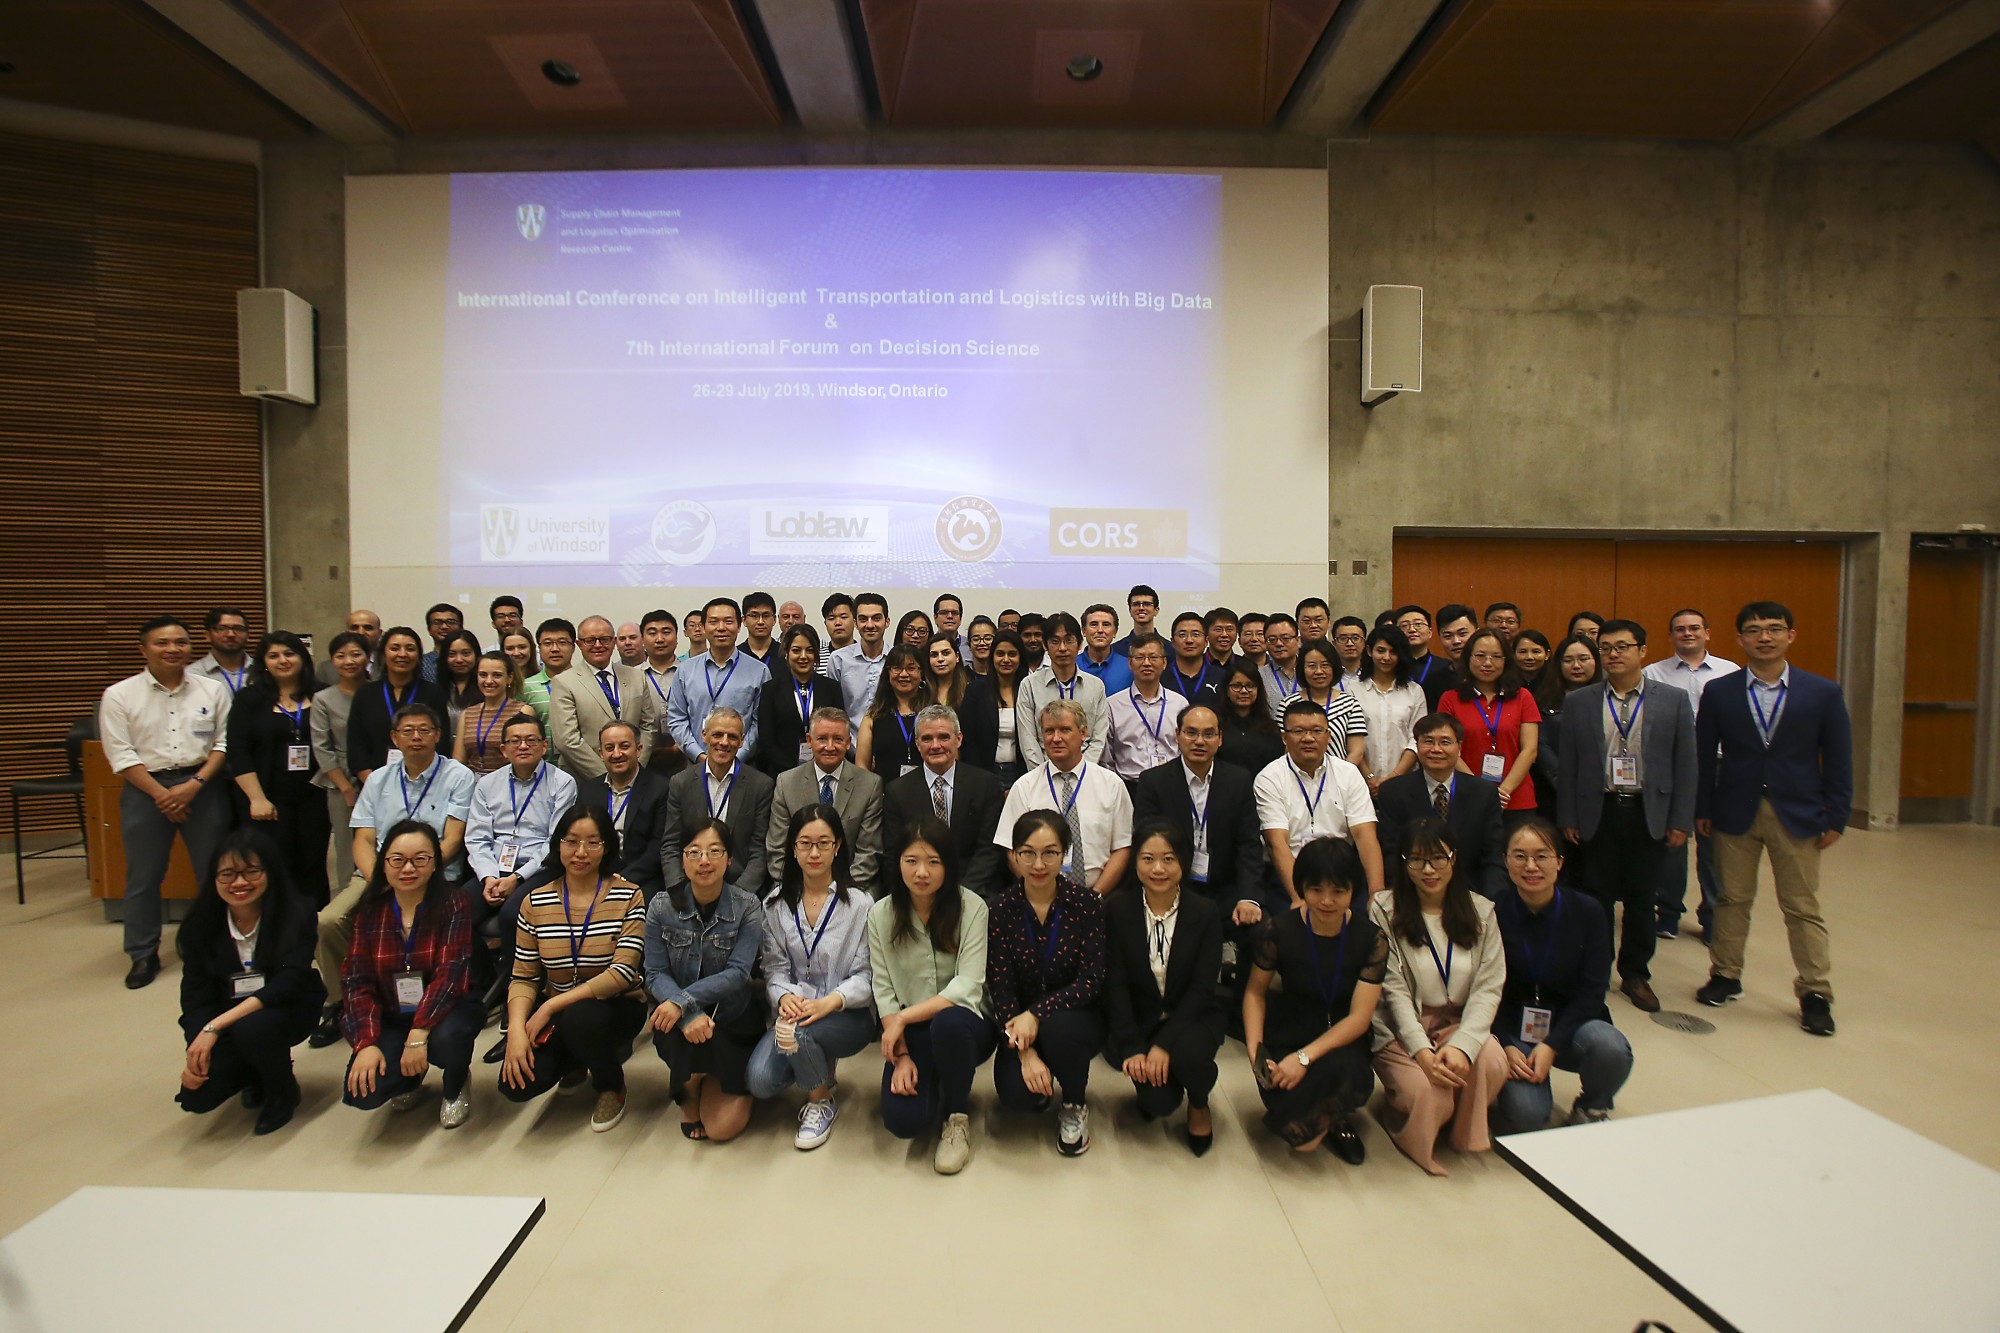 international researchers taking a group picture after the event